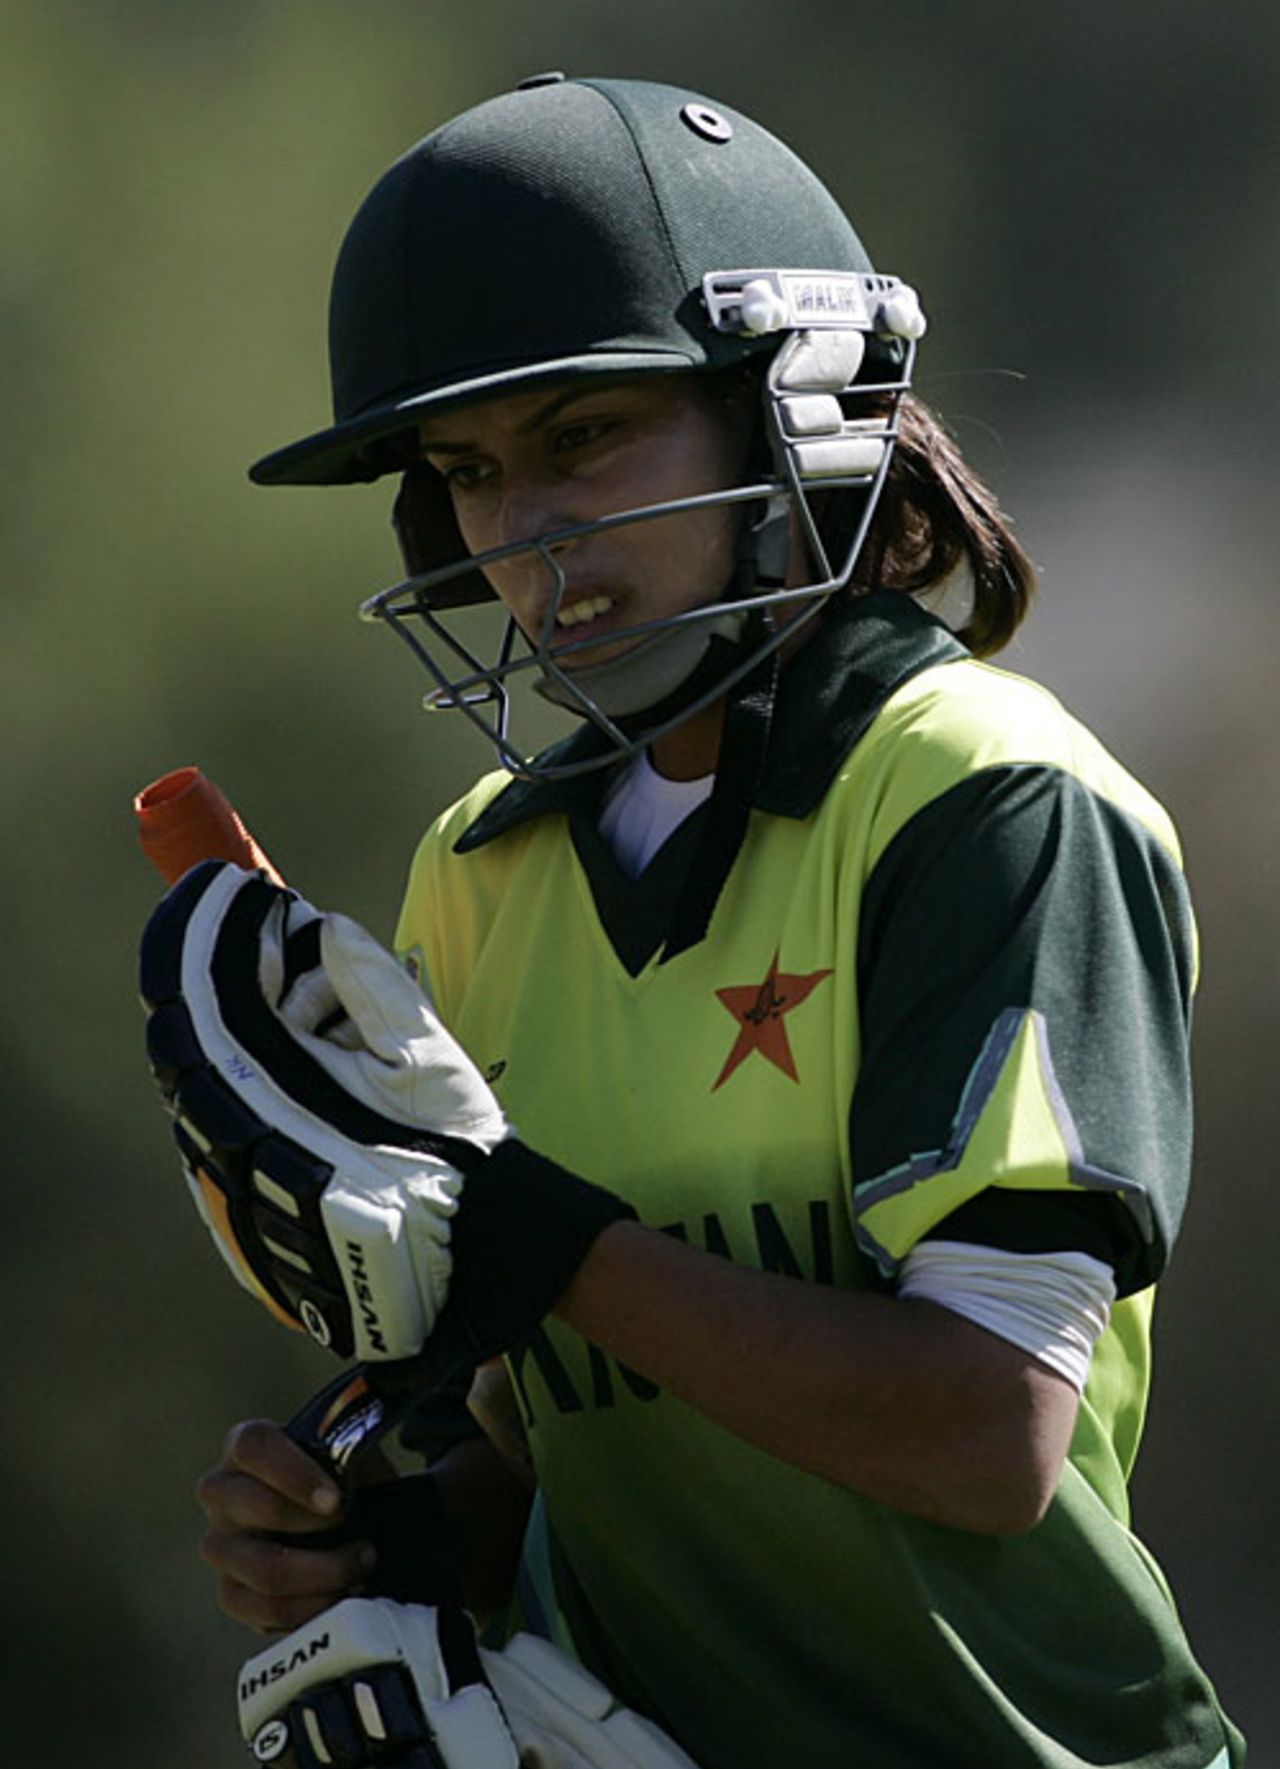 A disappointed Nain Abidi walks back after being run out for 11, India v Pakistan, Group B, women's World Cup, Bradman Oval, March 7, 2009